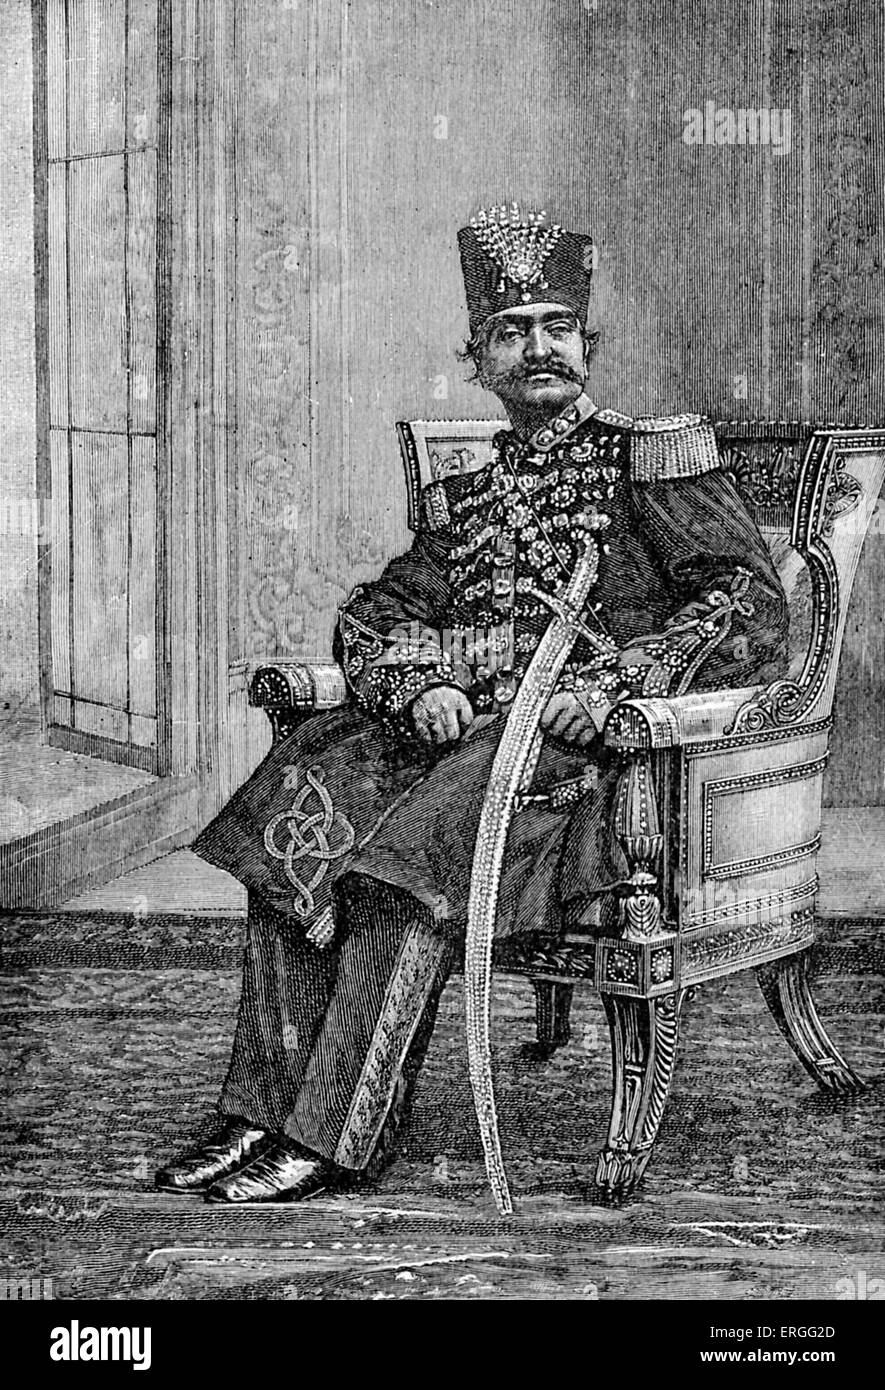 Naser al-Din Shah Qajar - portrait. King of Iran from 17 September 1848 - 1 May 1896 when he was assassinated. 16 July 1831 – 1 May 1896. Stock Photo